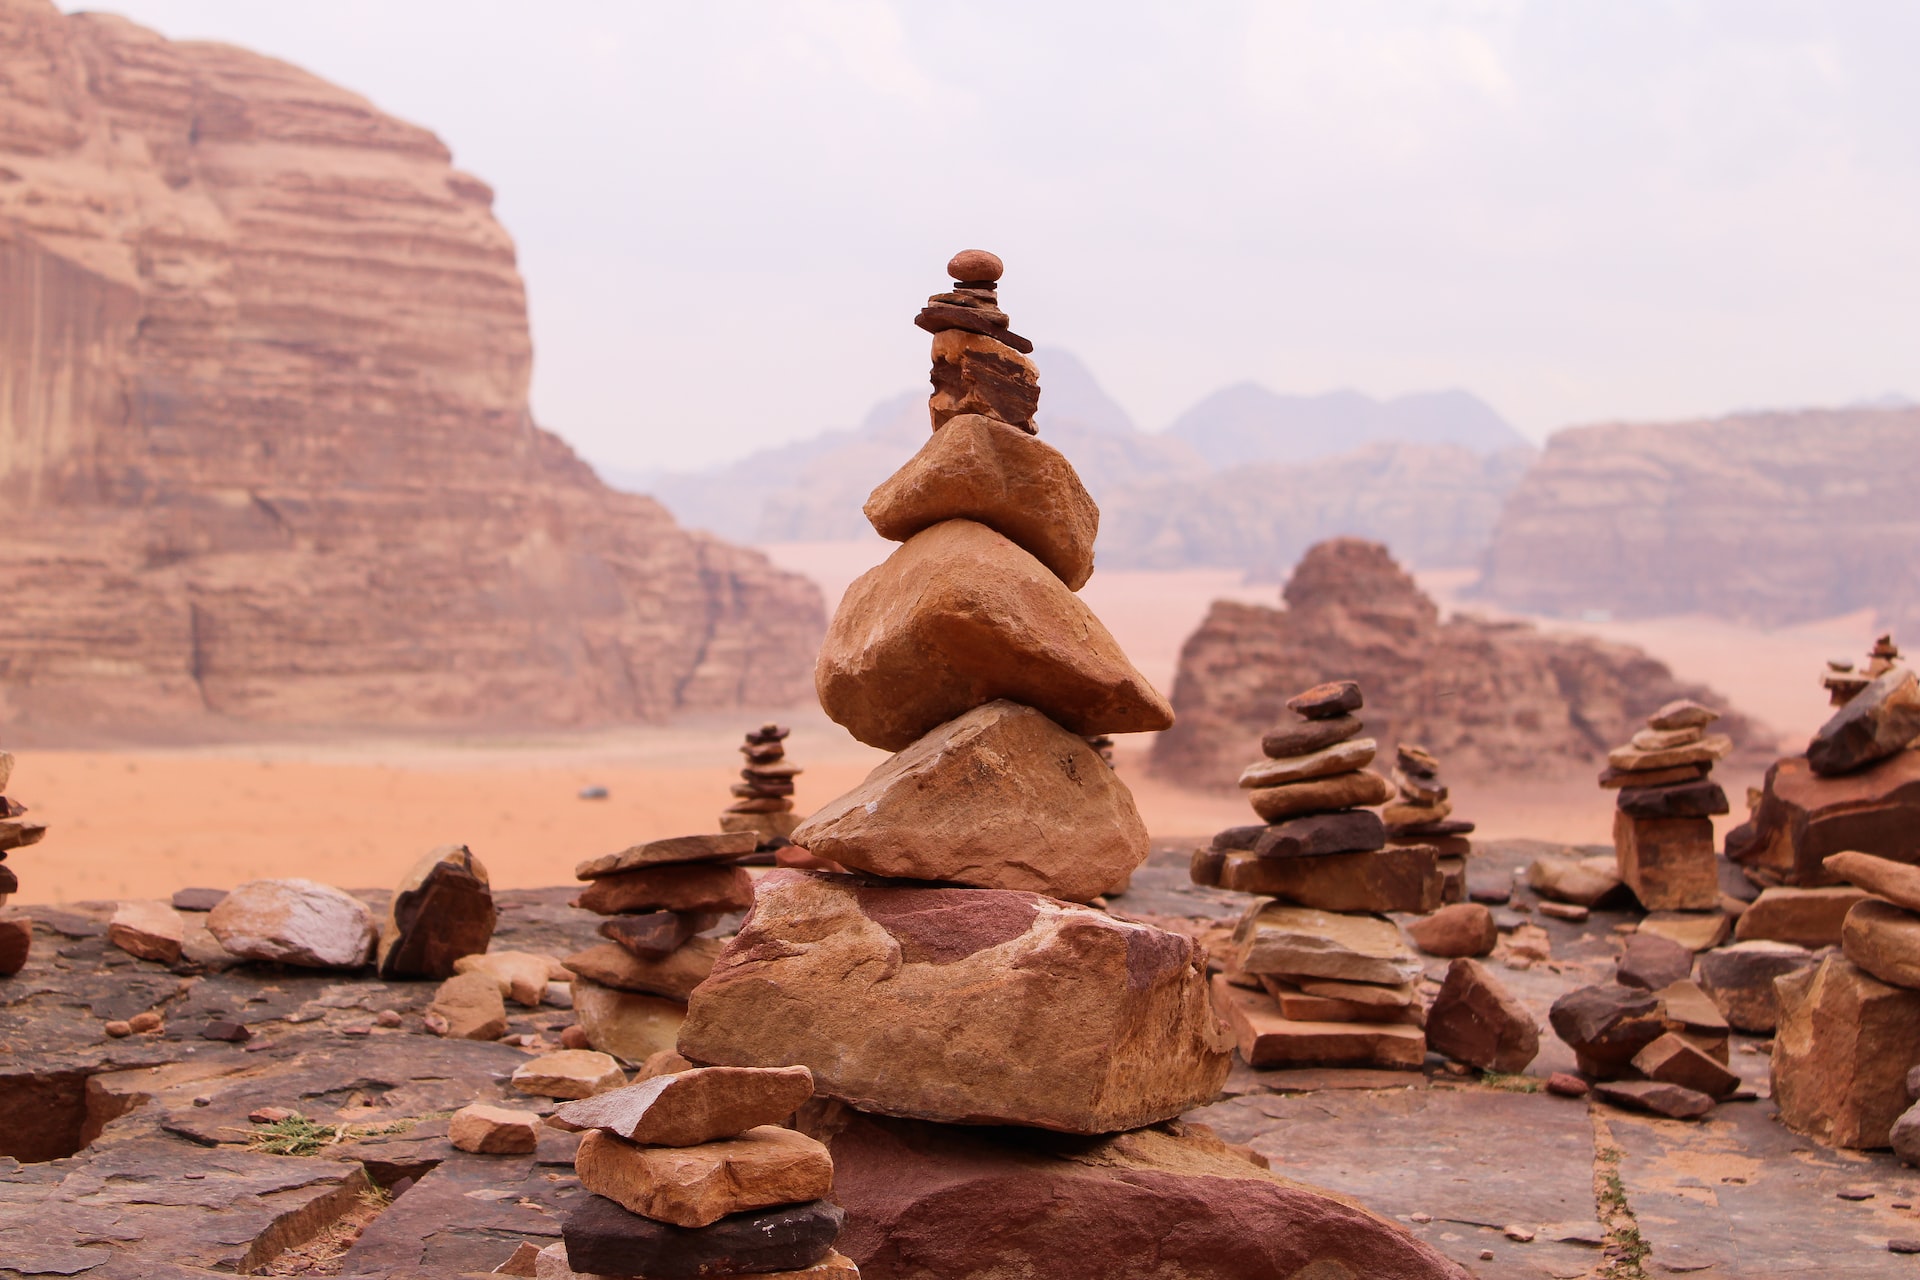 Movies Filmed in Wadi Rum- No huge sandworms here. We chechked 